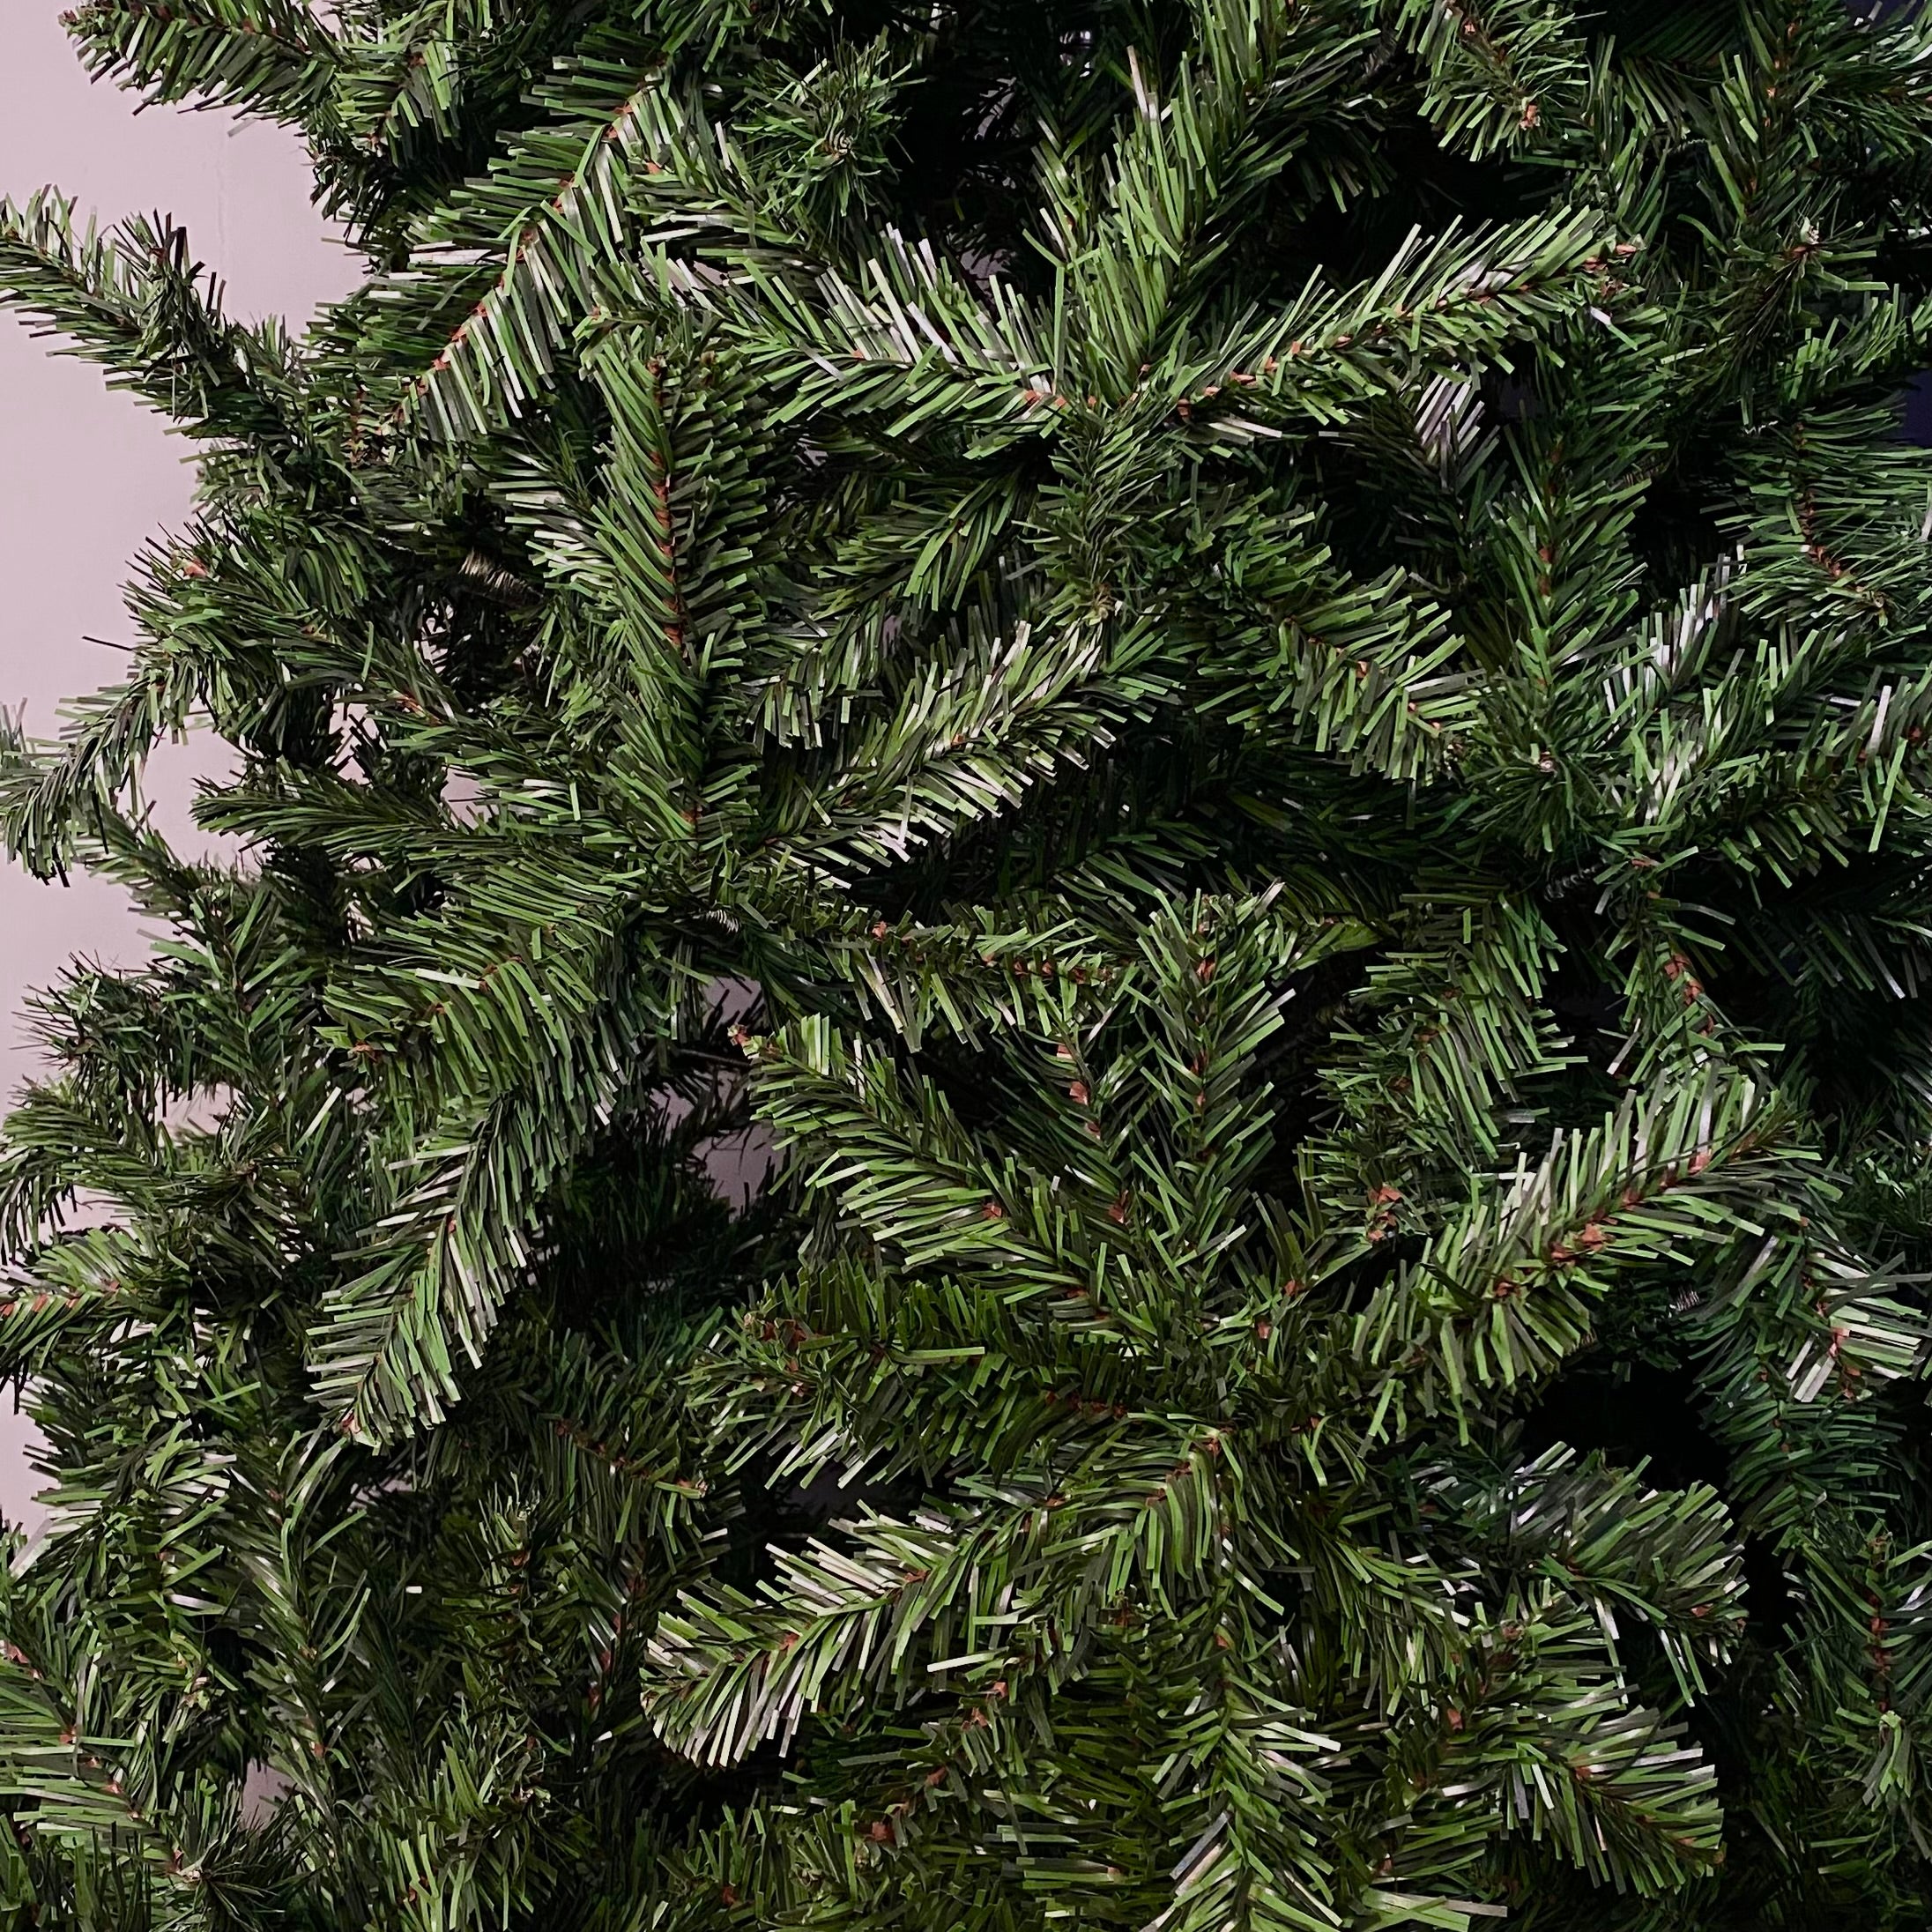 8ft (2.4m) Woodcote Spruce Artificial Christmas Tree